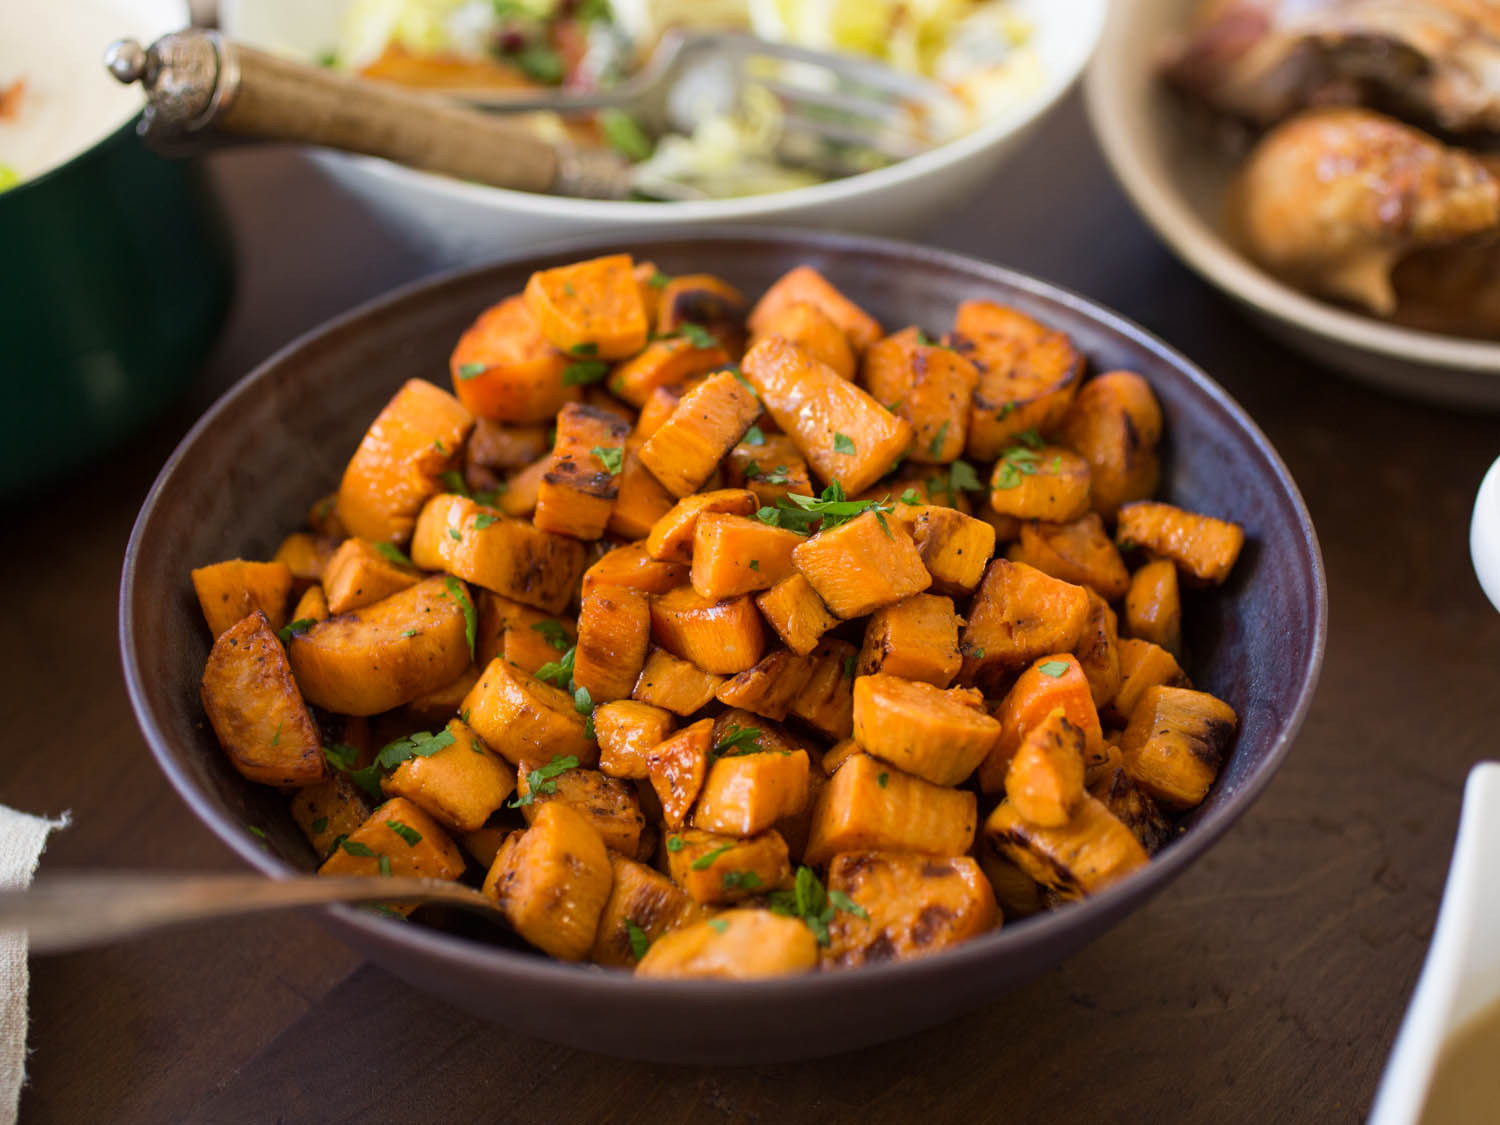 Sweet Potatoes Recipe For Thanksgiving Dinner
 A Classic Thanksgiving Menu to Feed a Crowd